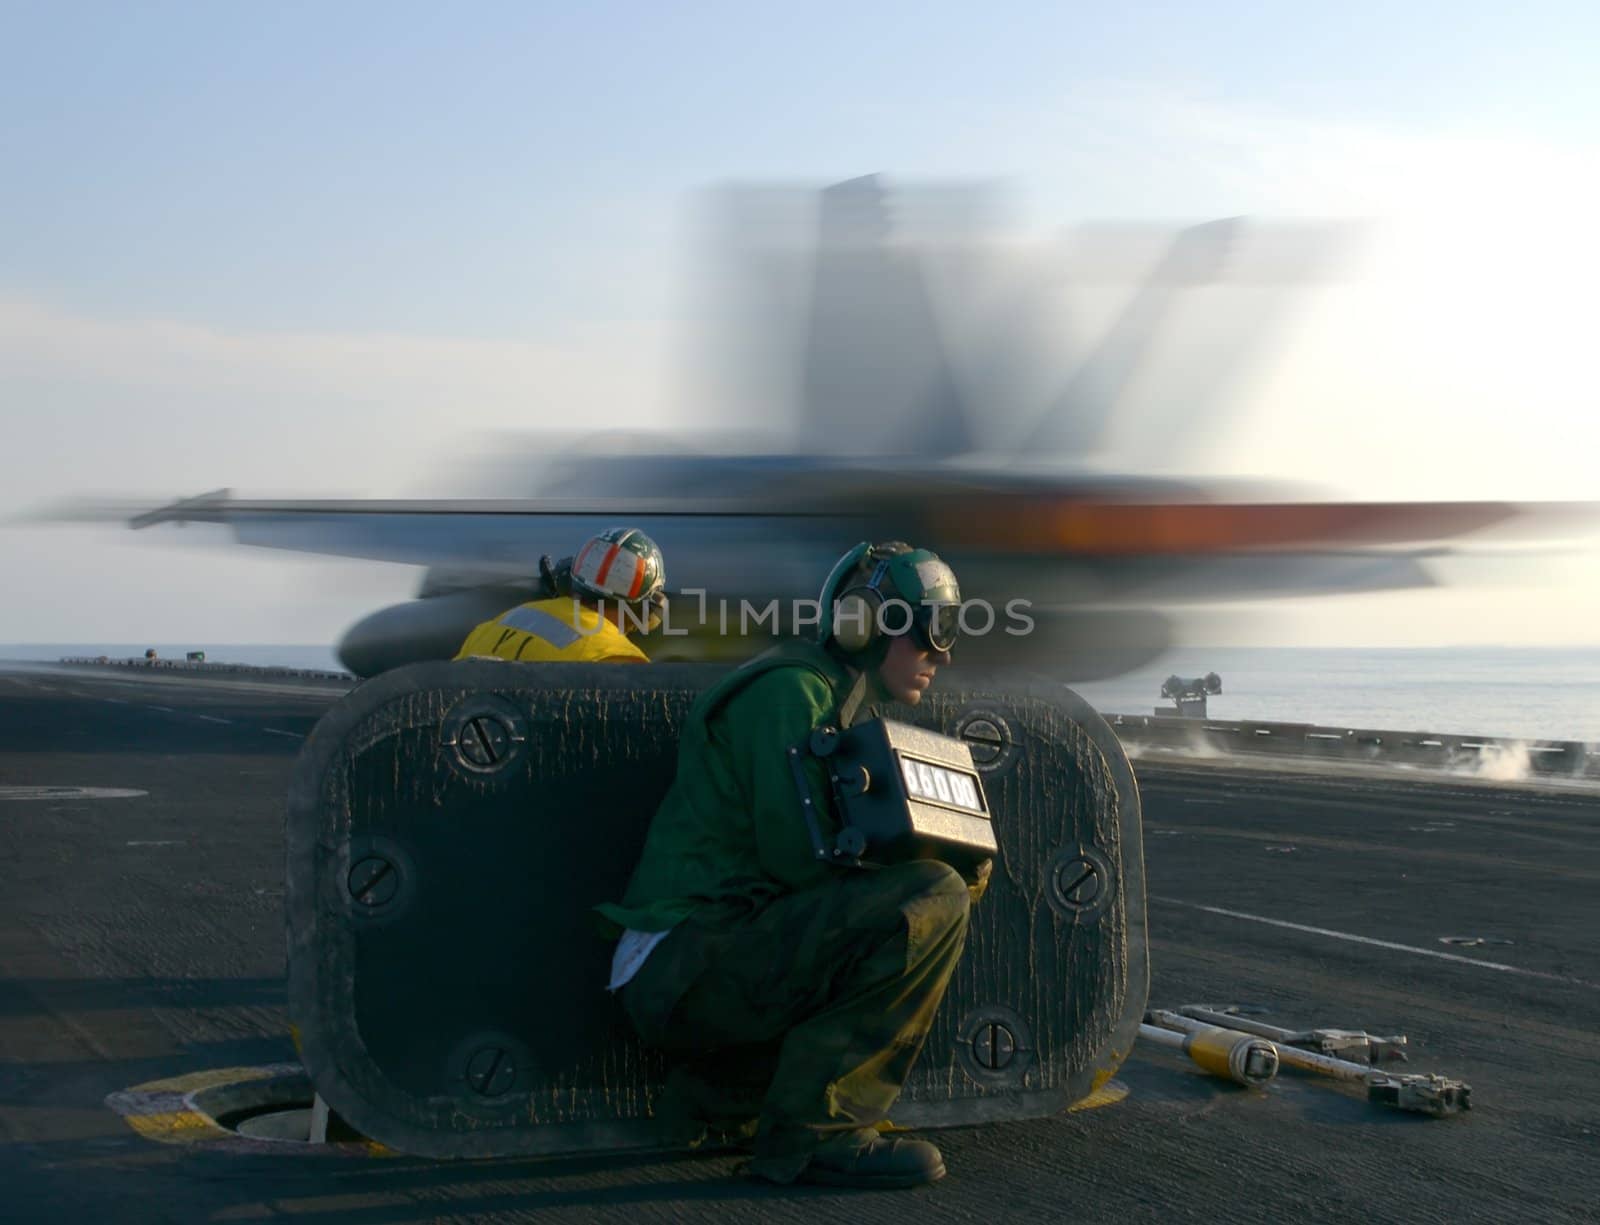 An F-18 Super Hornet rockets down the catapult track of a nuclear powered aircraft carrier